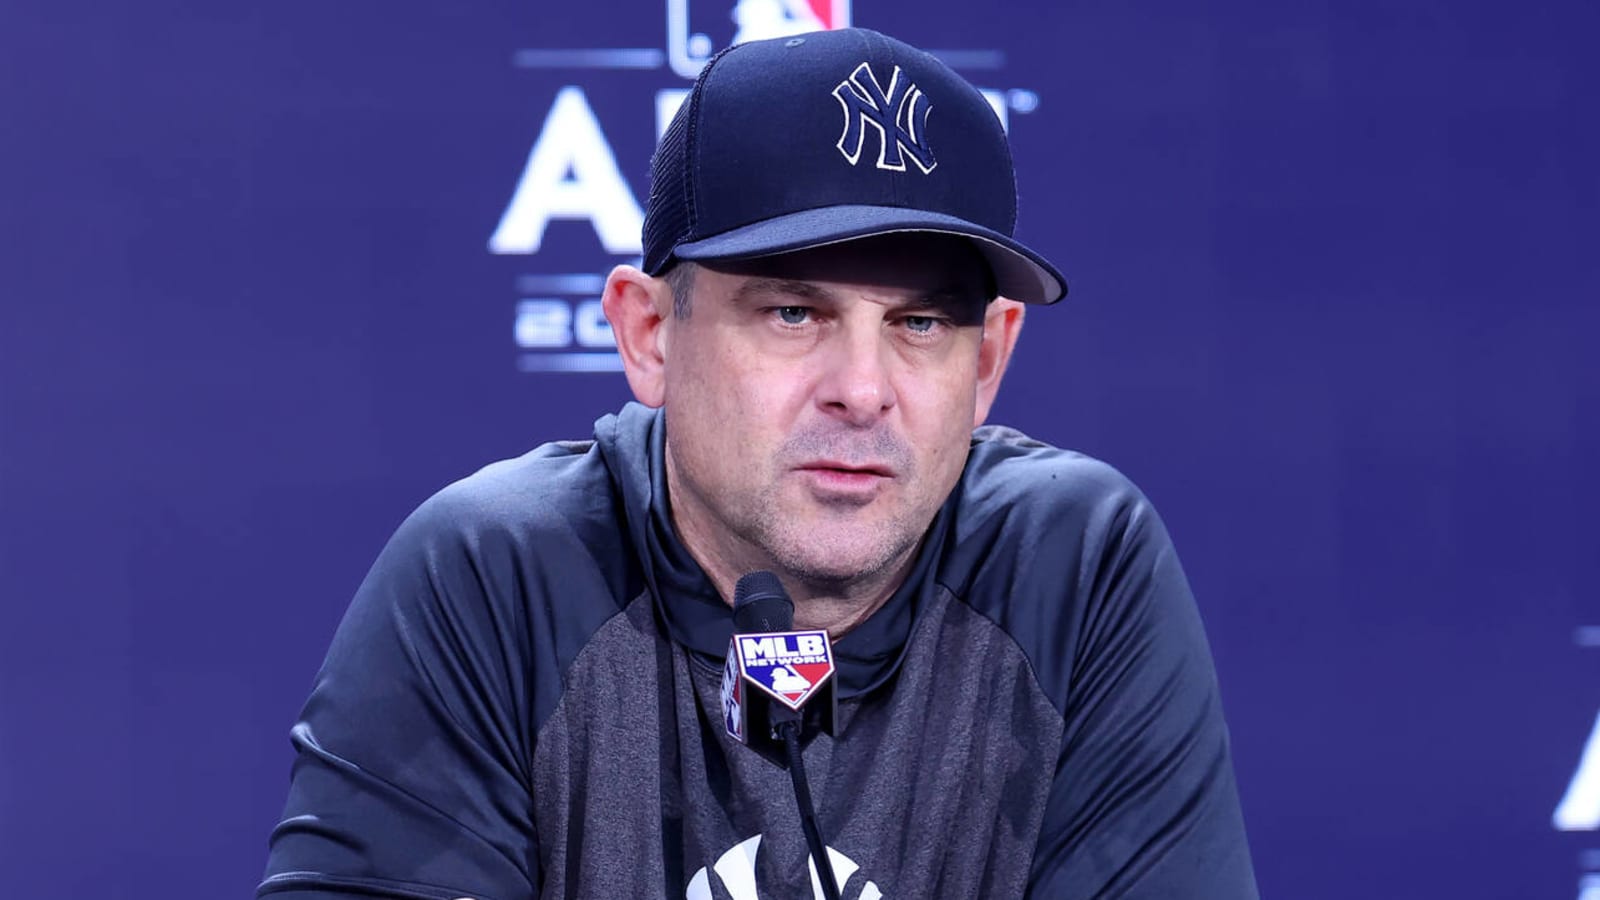 Aaron Boone To Make Weekly Appearances With Michael Kay, Not WFAN